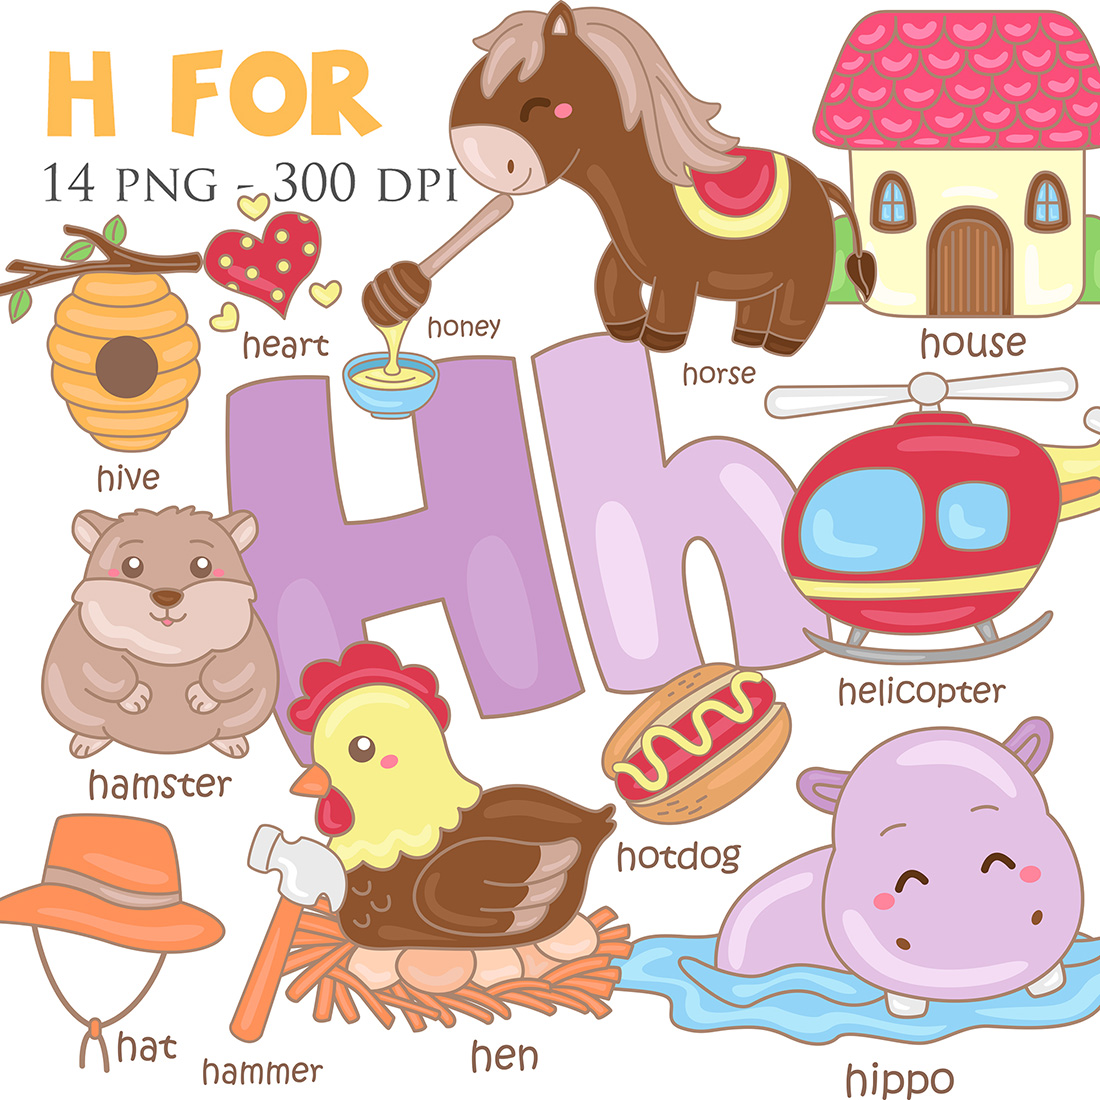 Alphabet H For Vocabulary School Letter Reading Writing Font Study Learning Student Toodler Kids Hive Hamster Heart Honey Horse House Hat Hotdog Hippo Helicopter Hen Cartoon Illustration Vector Clipart cover image.